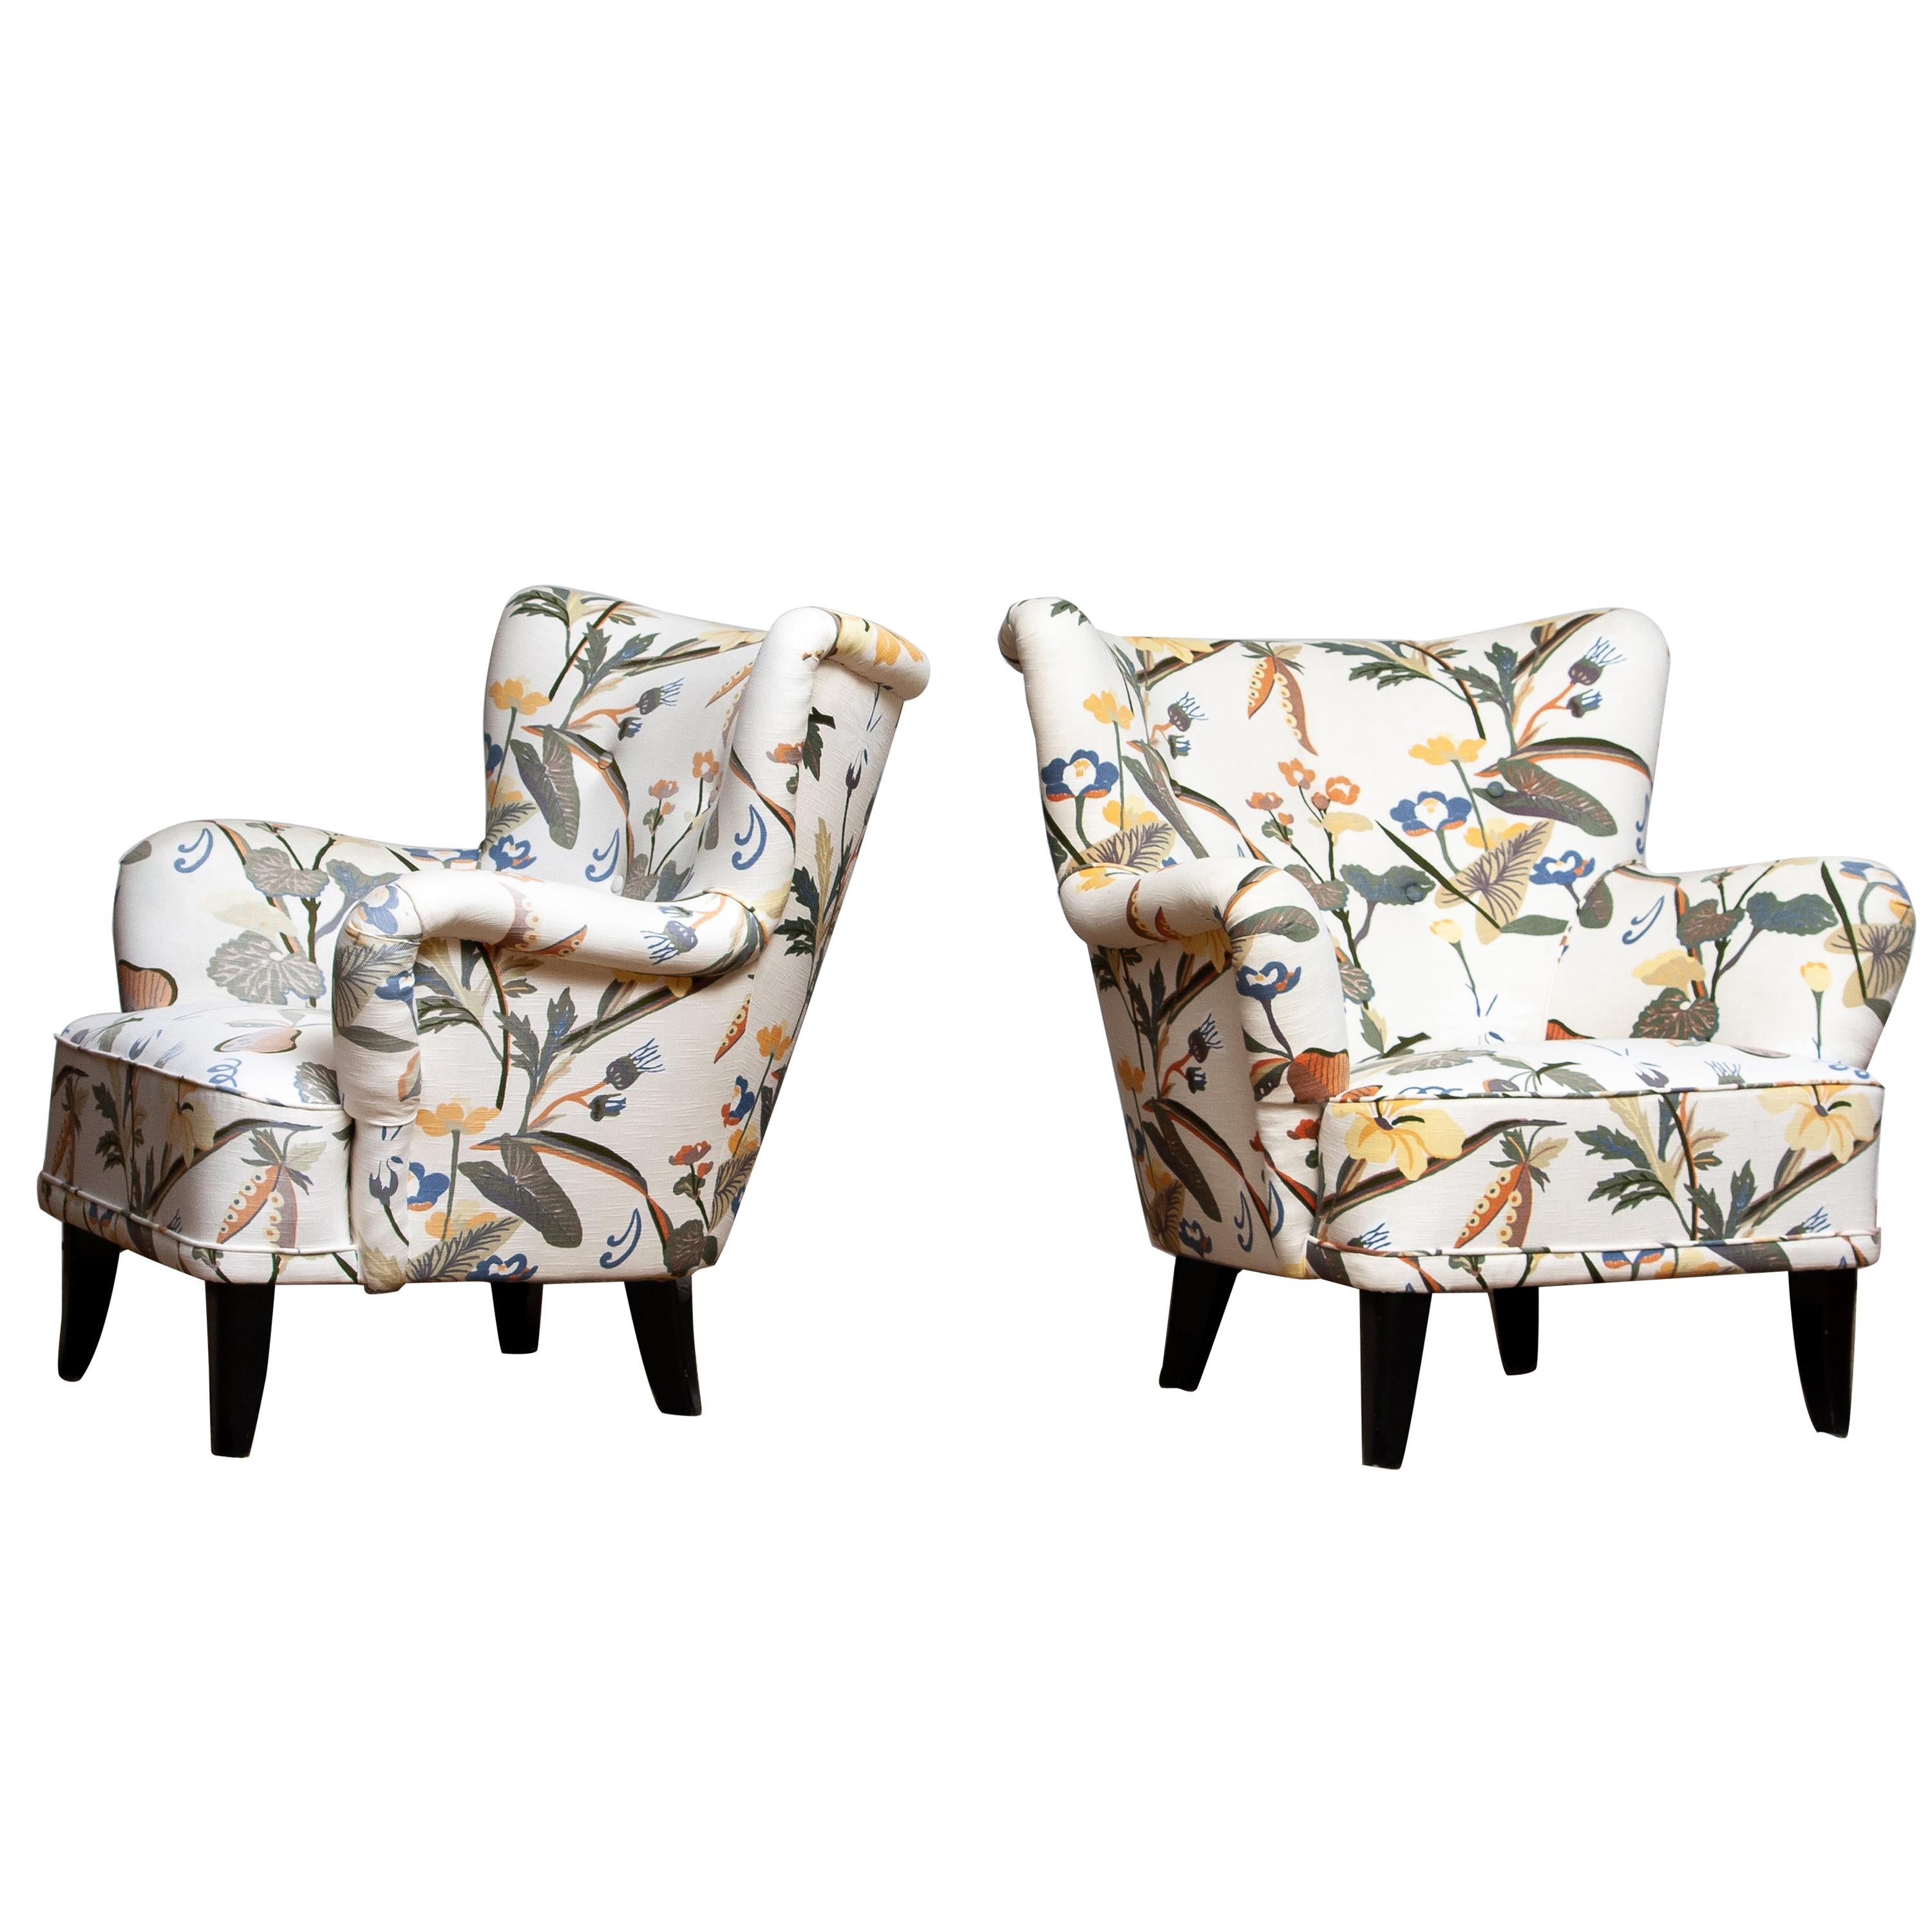 Set of two beautiful 1940s-1950s lounge / club chairs upholstered, in a later period, with the typical floral print fabric designed by Josef Frank.
The chairs are designed by Ilmari Lappalainen for Asko in Finland
The overall condition is good.